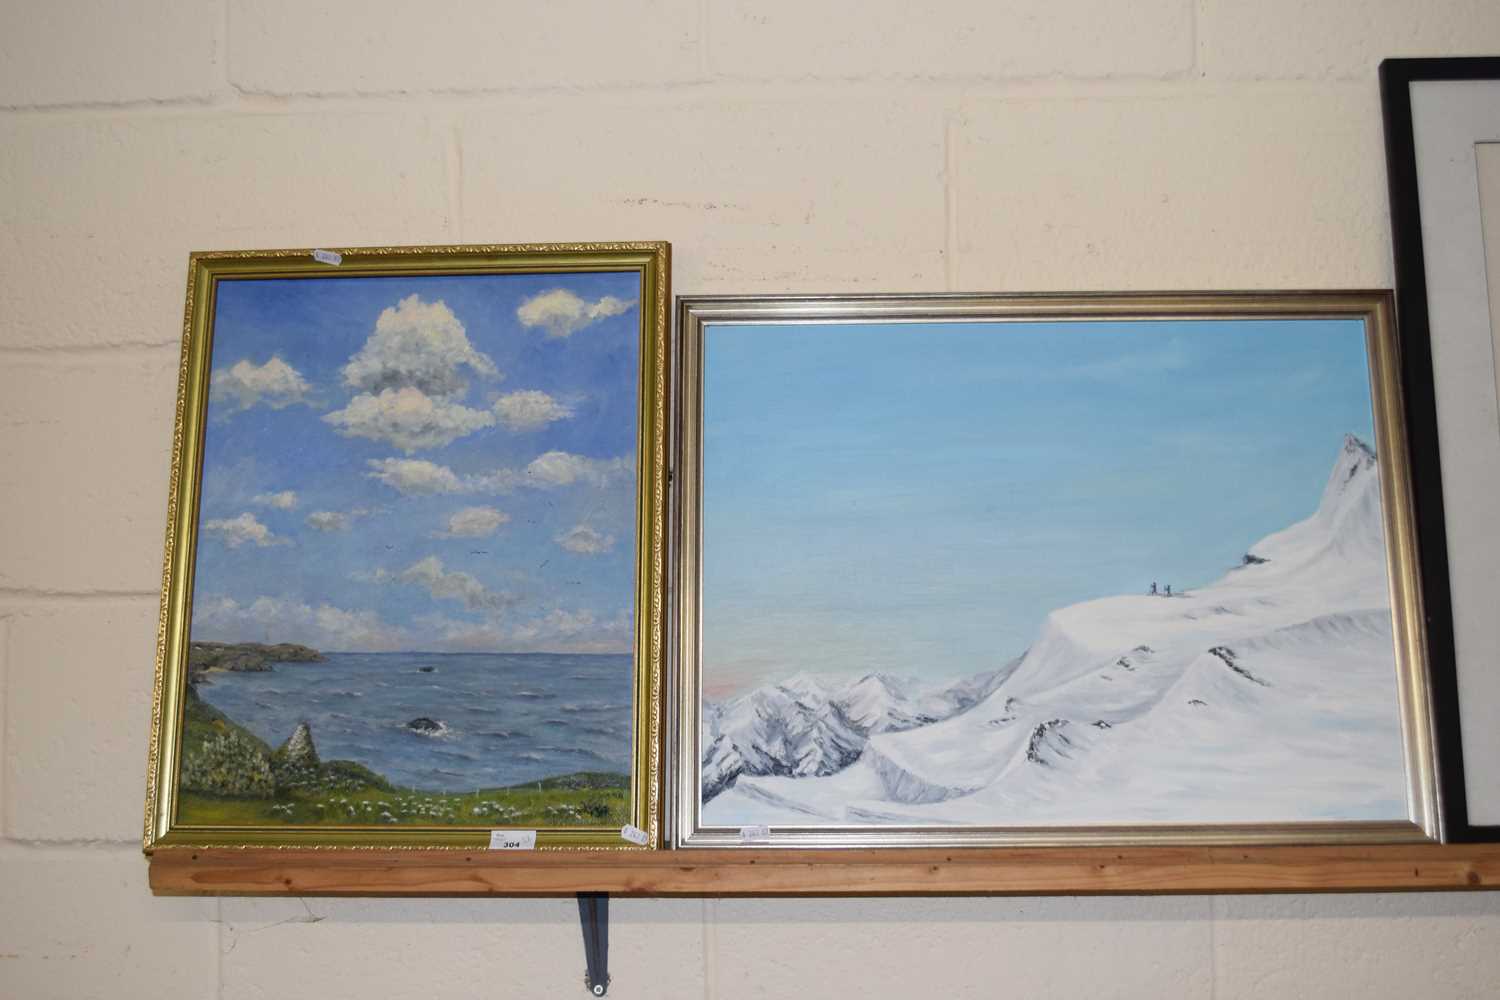 Contemporary school, two oil on board studies, coastal scene and skiers on a mountainside